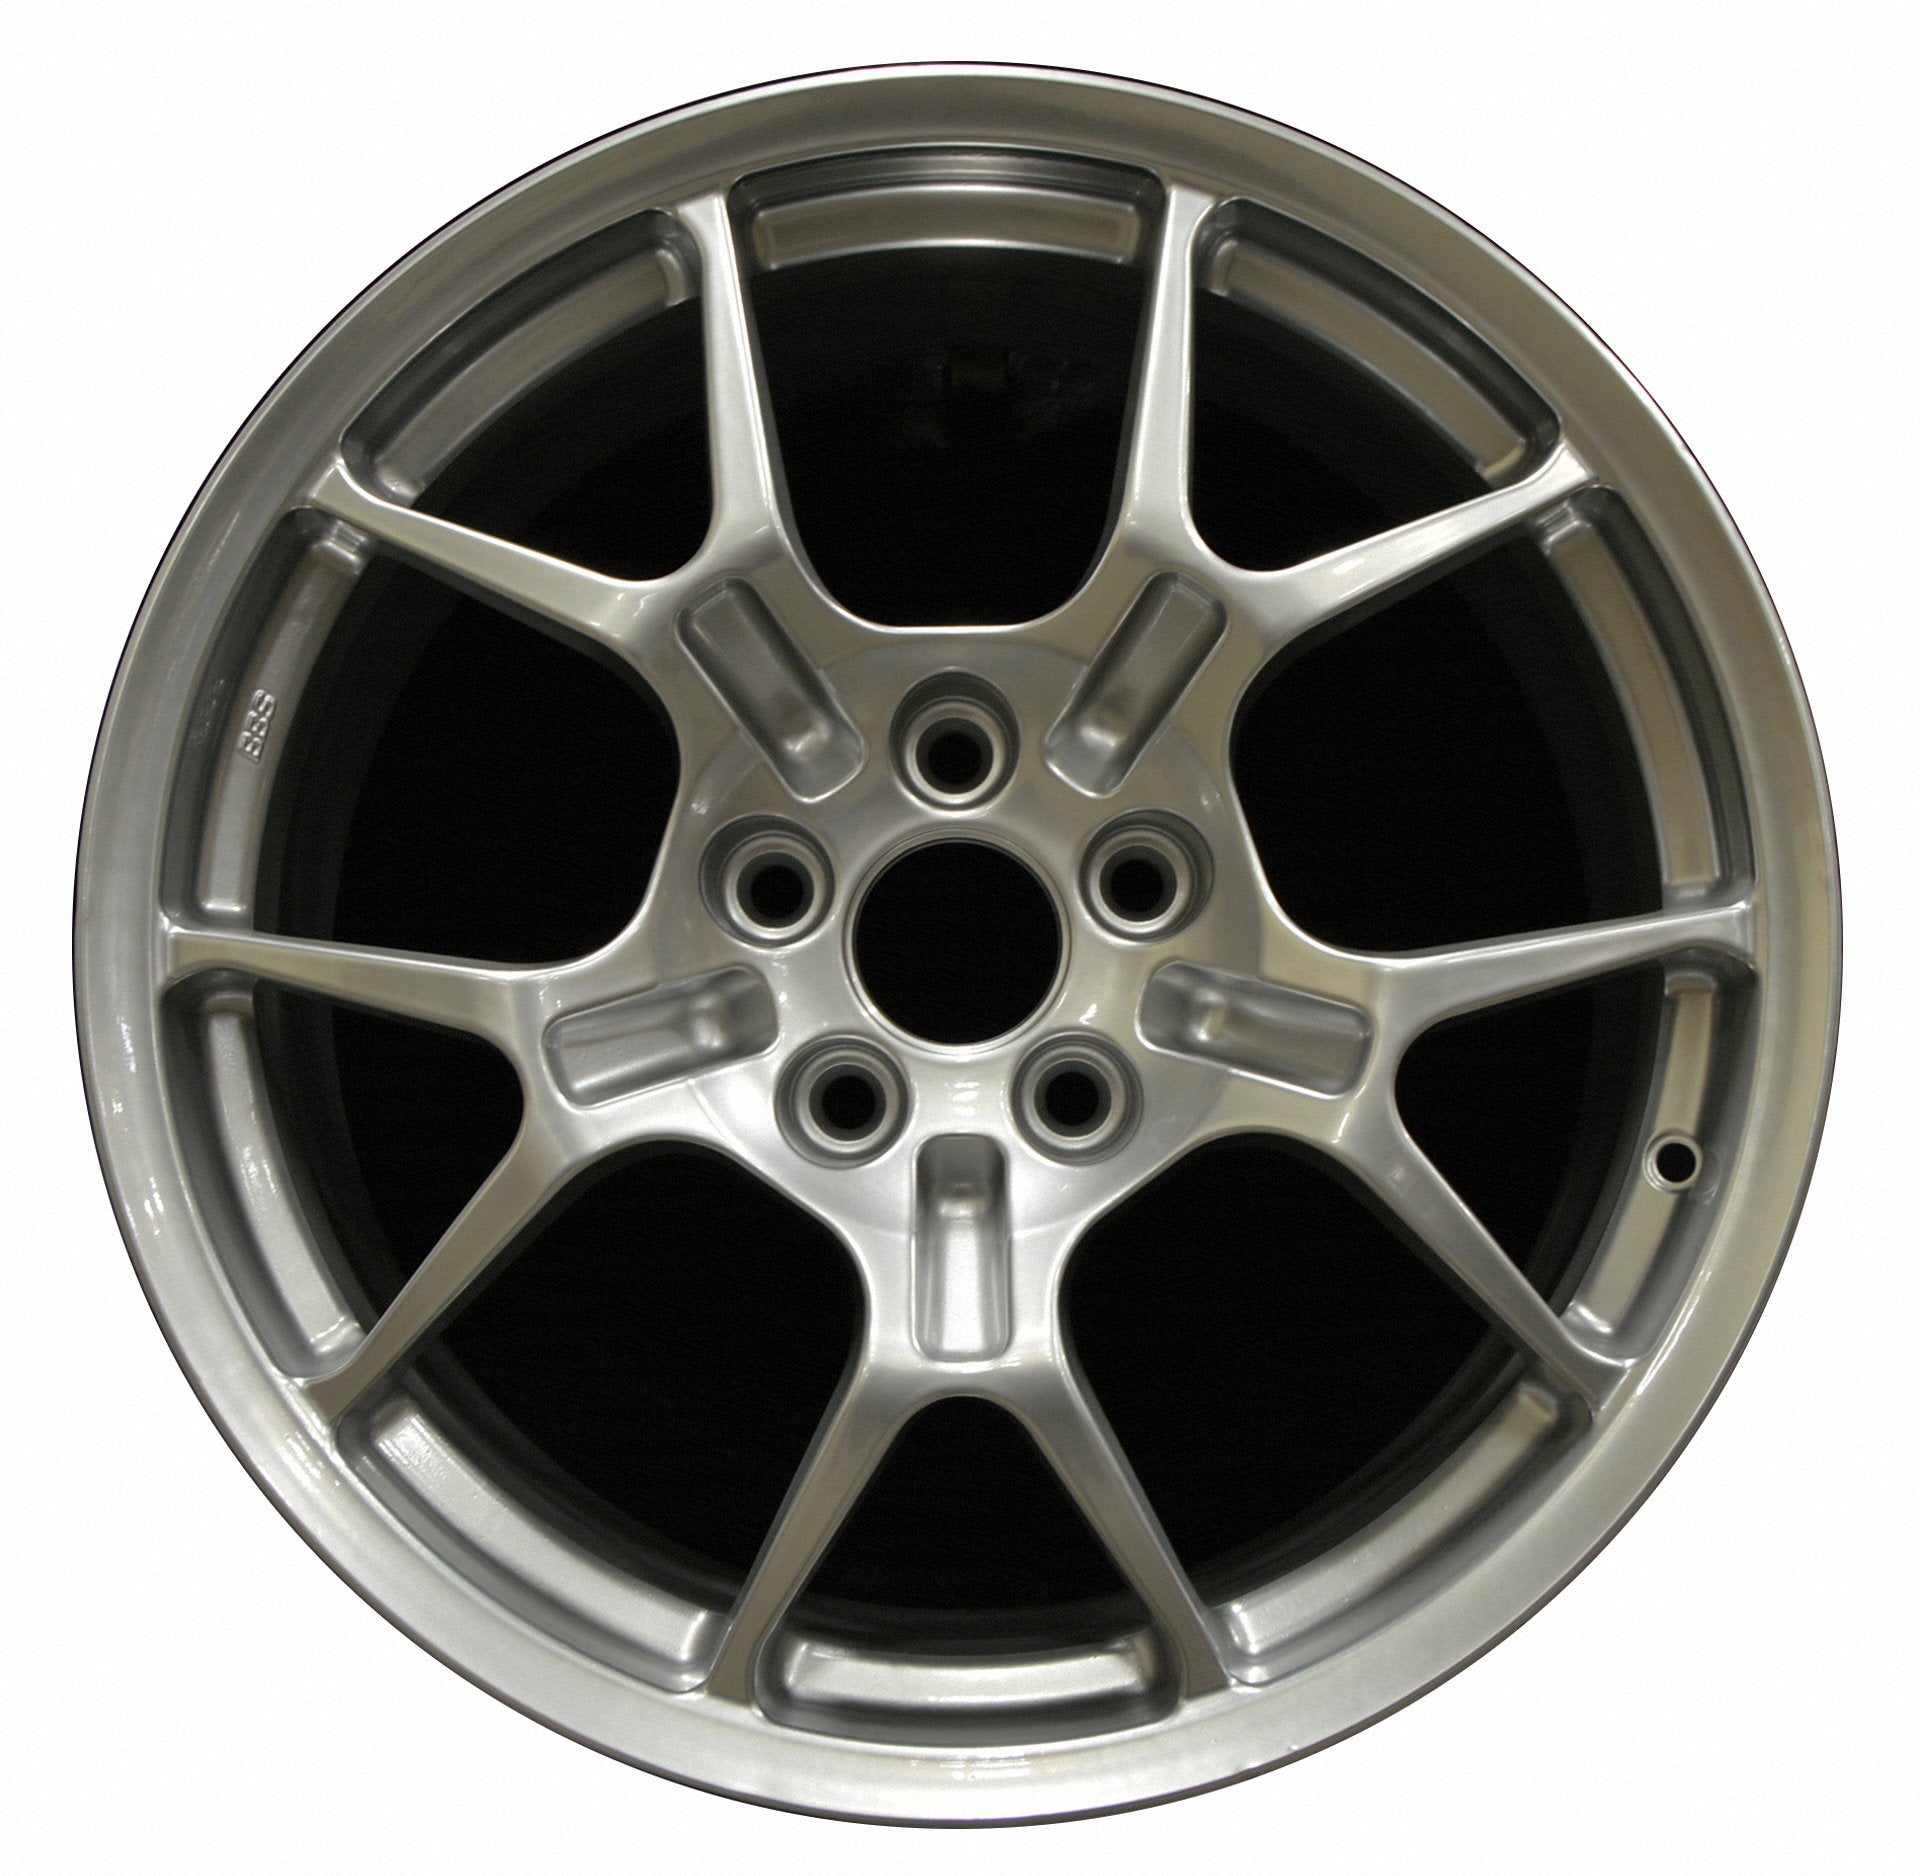 Ford GT  2005, 2006 Factory OEM Car Wheel Size 19x11.5 Alloy WAO.3567RE.HYPV1.FF